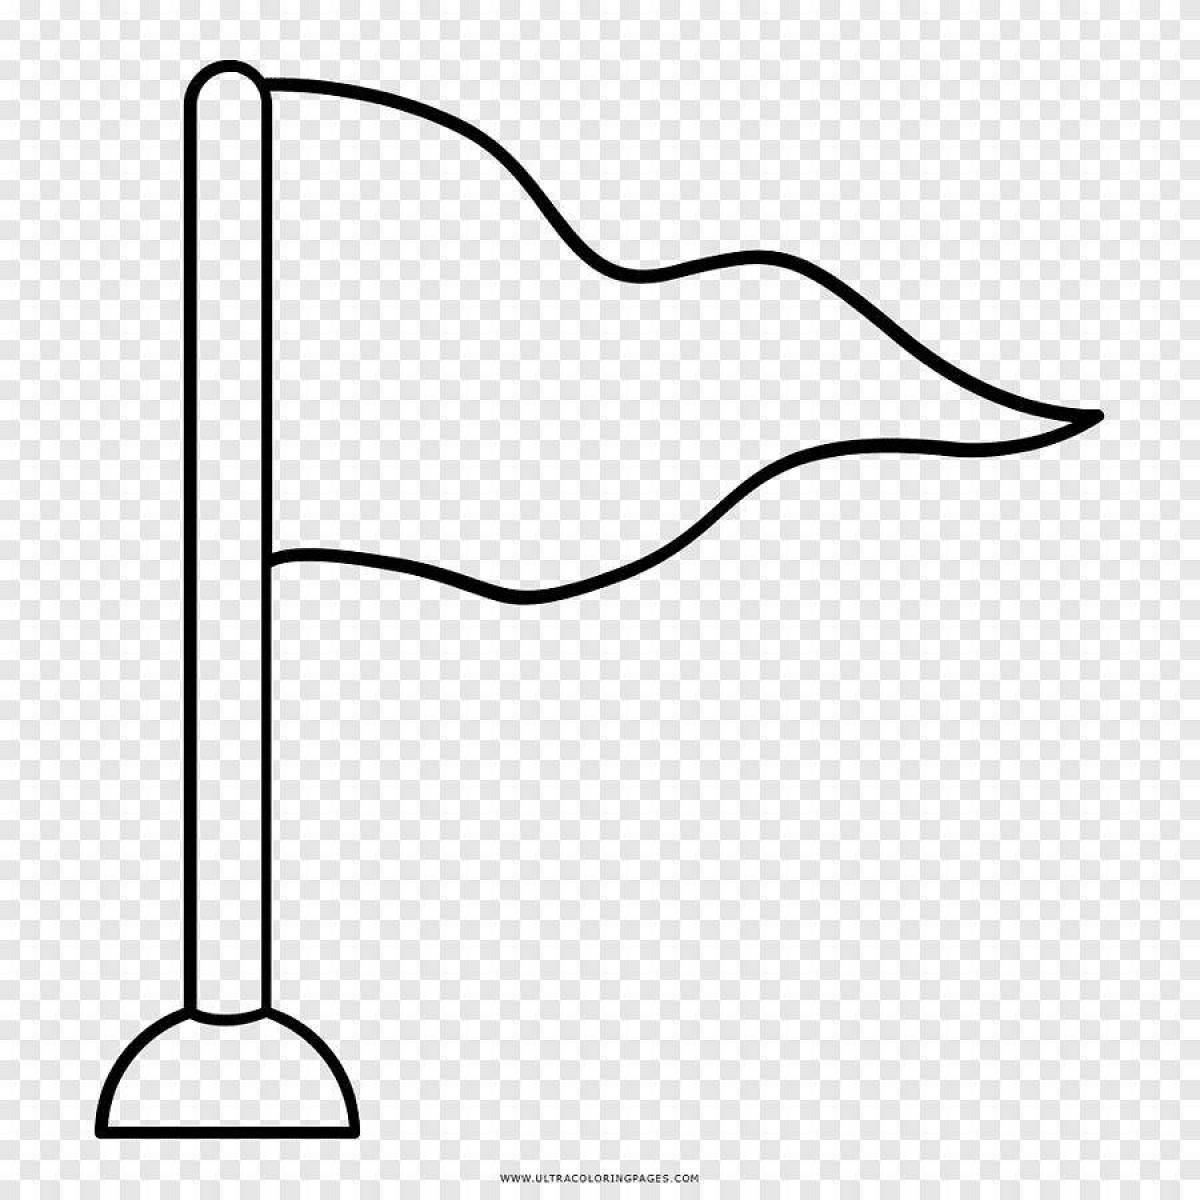 Fun flag coloring page